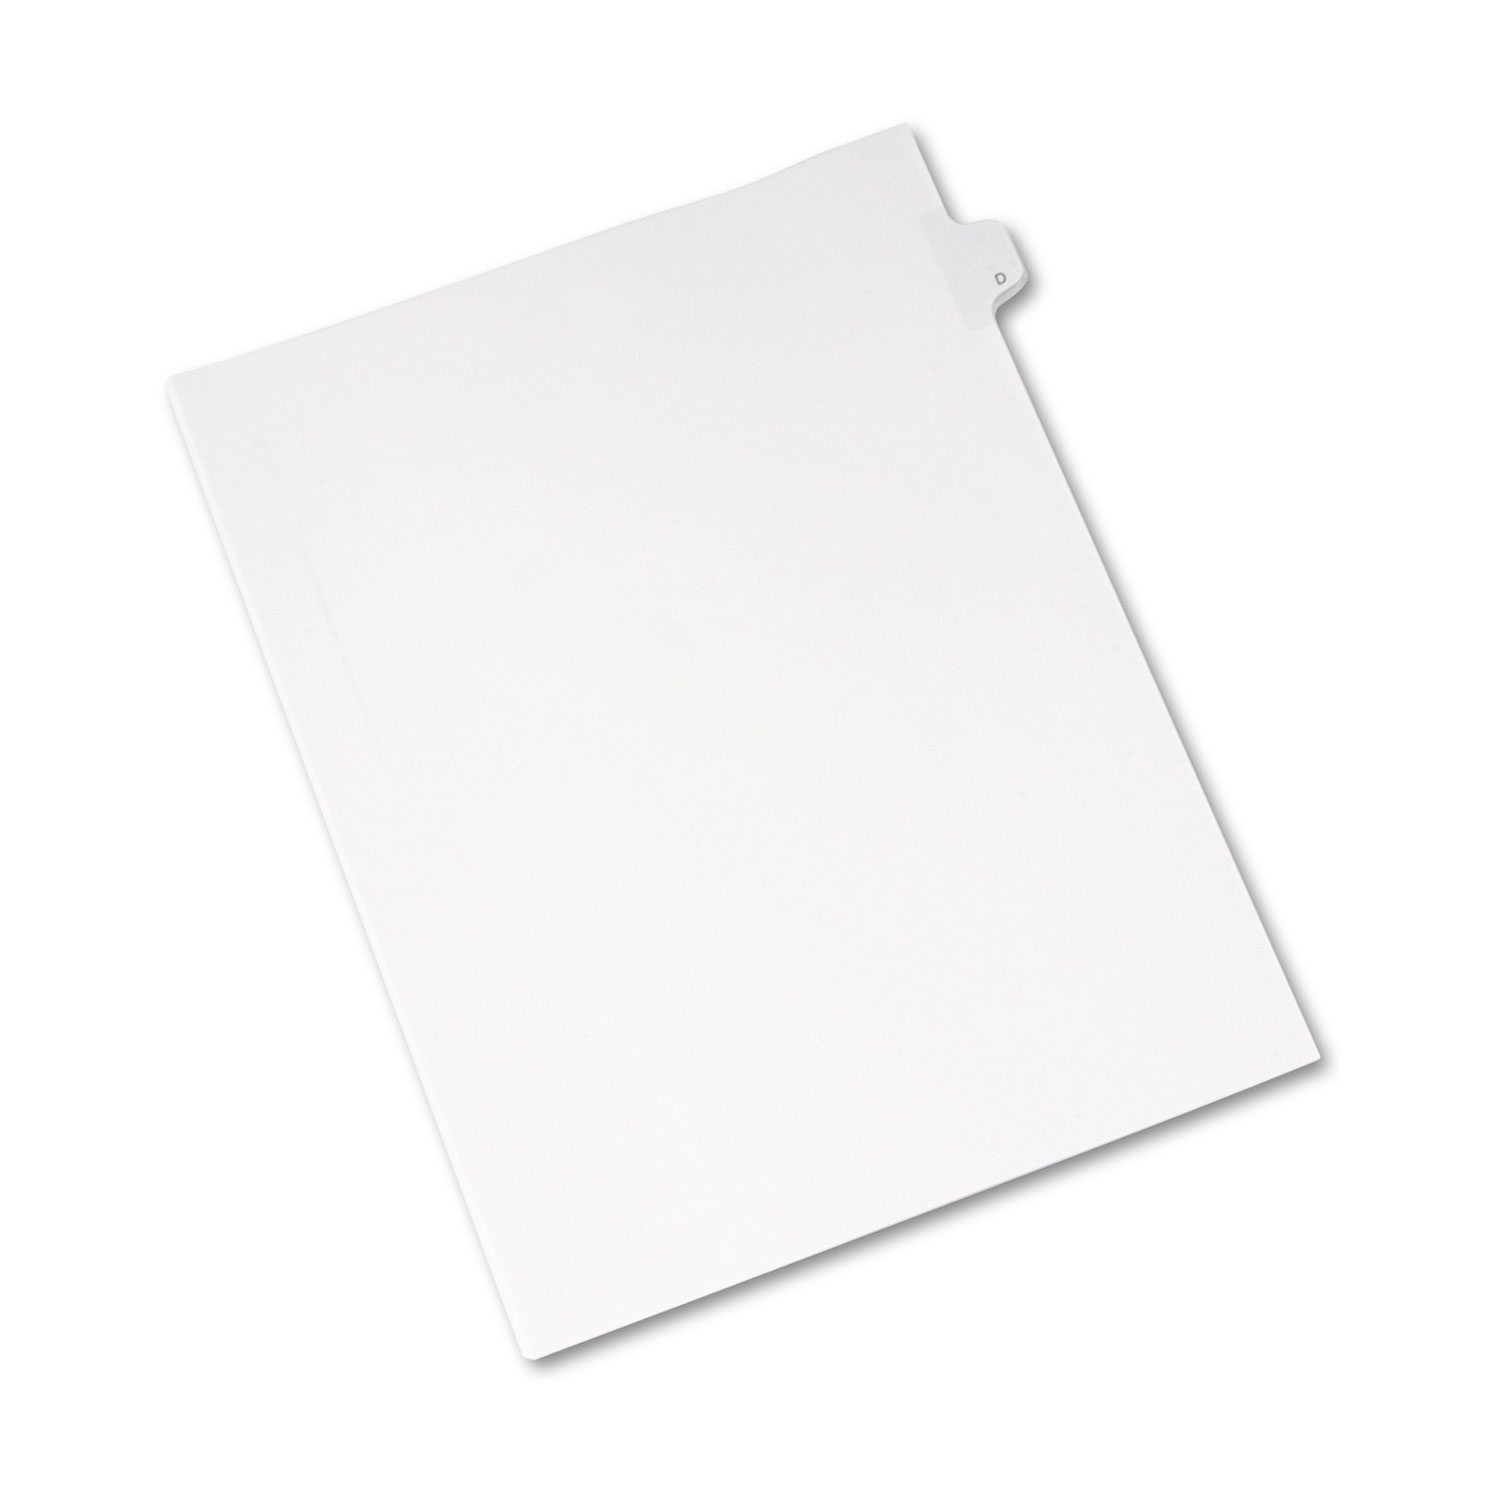 Allstate-Style Legal Exhibit Side Tab Divider, Title: D, Letter, White, 25/Pack